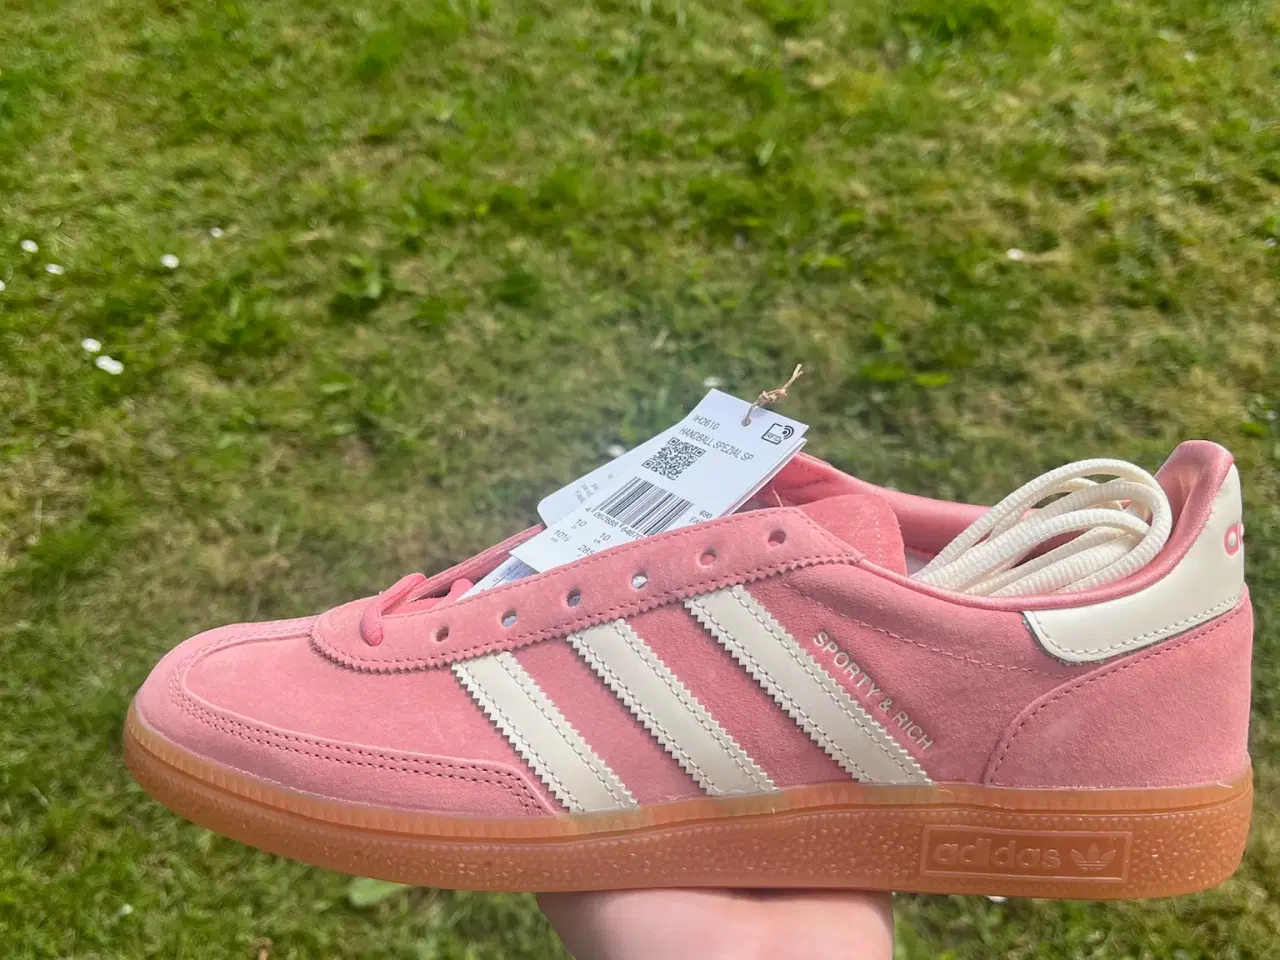 Billede 1 - Adidas spezial Sporty and rich "pink"